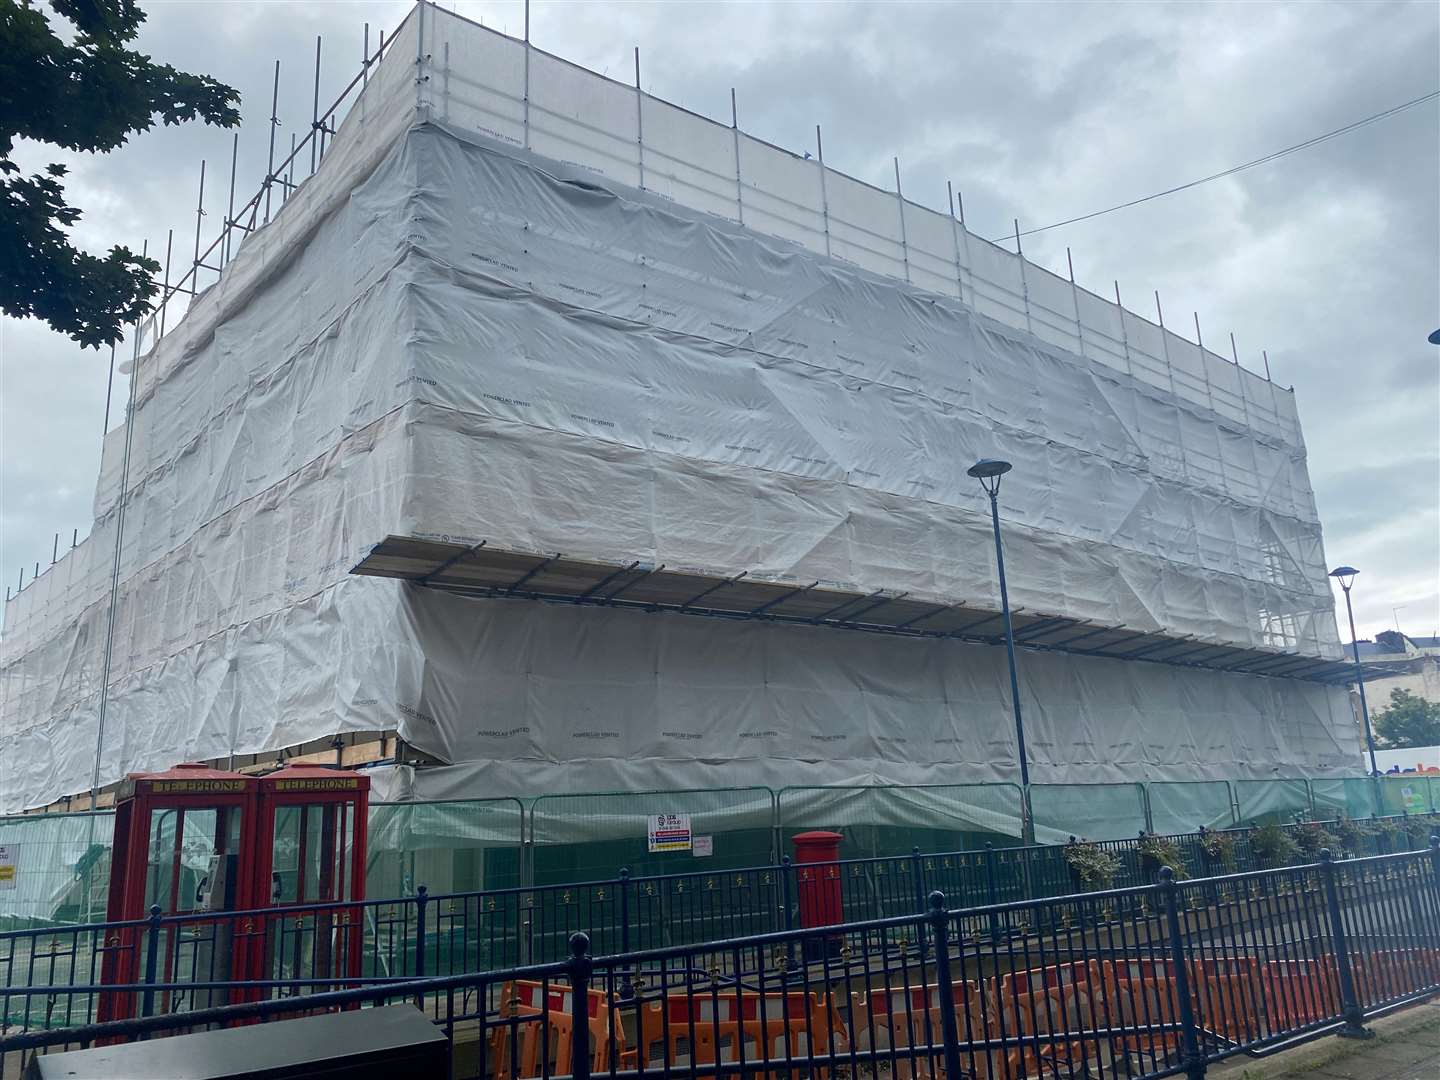 The ex-club is covered in scaffolding as demolition starts at the back of the building